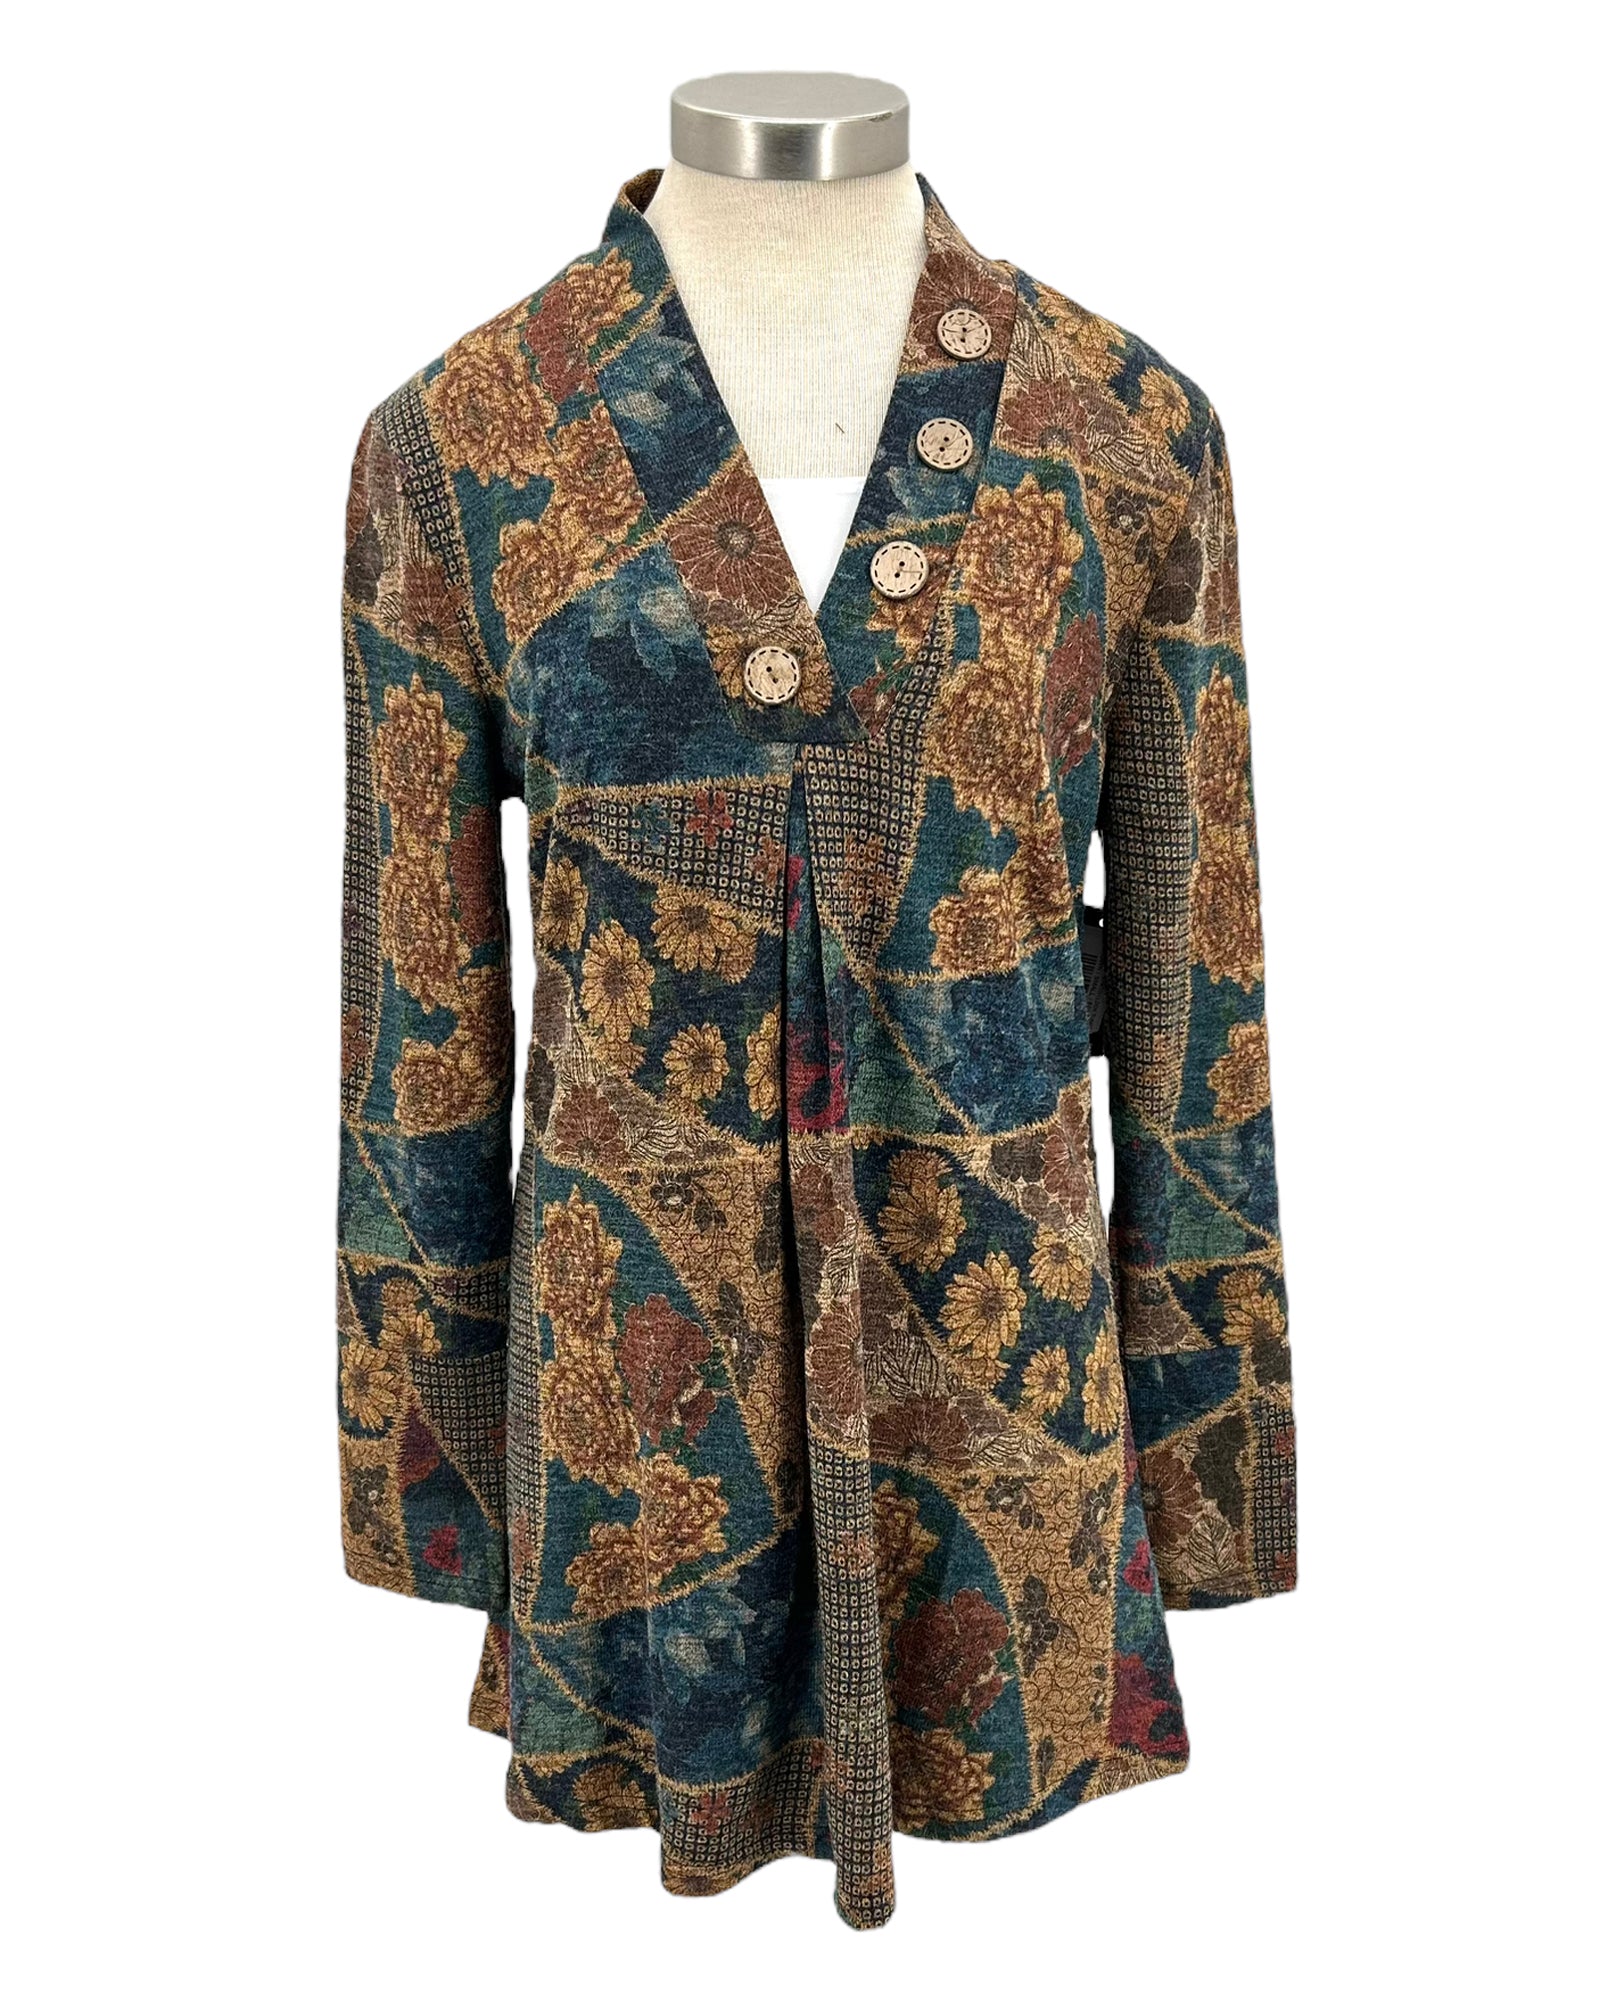 RADZOLI 22603 PATCH LOOK TUNIC | Long Sleeve Brown Blue Floral Tunic ...